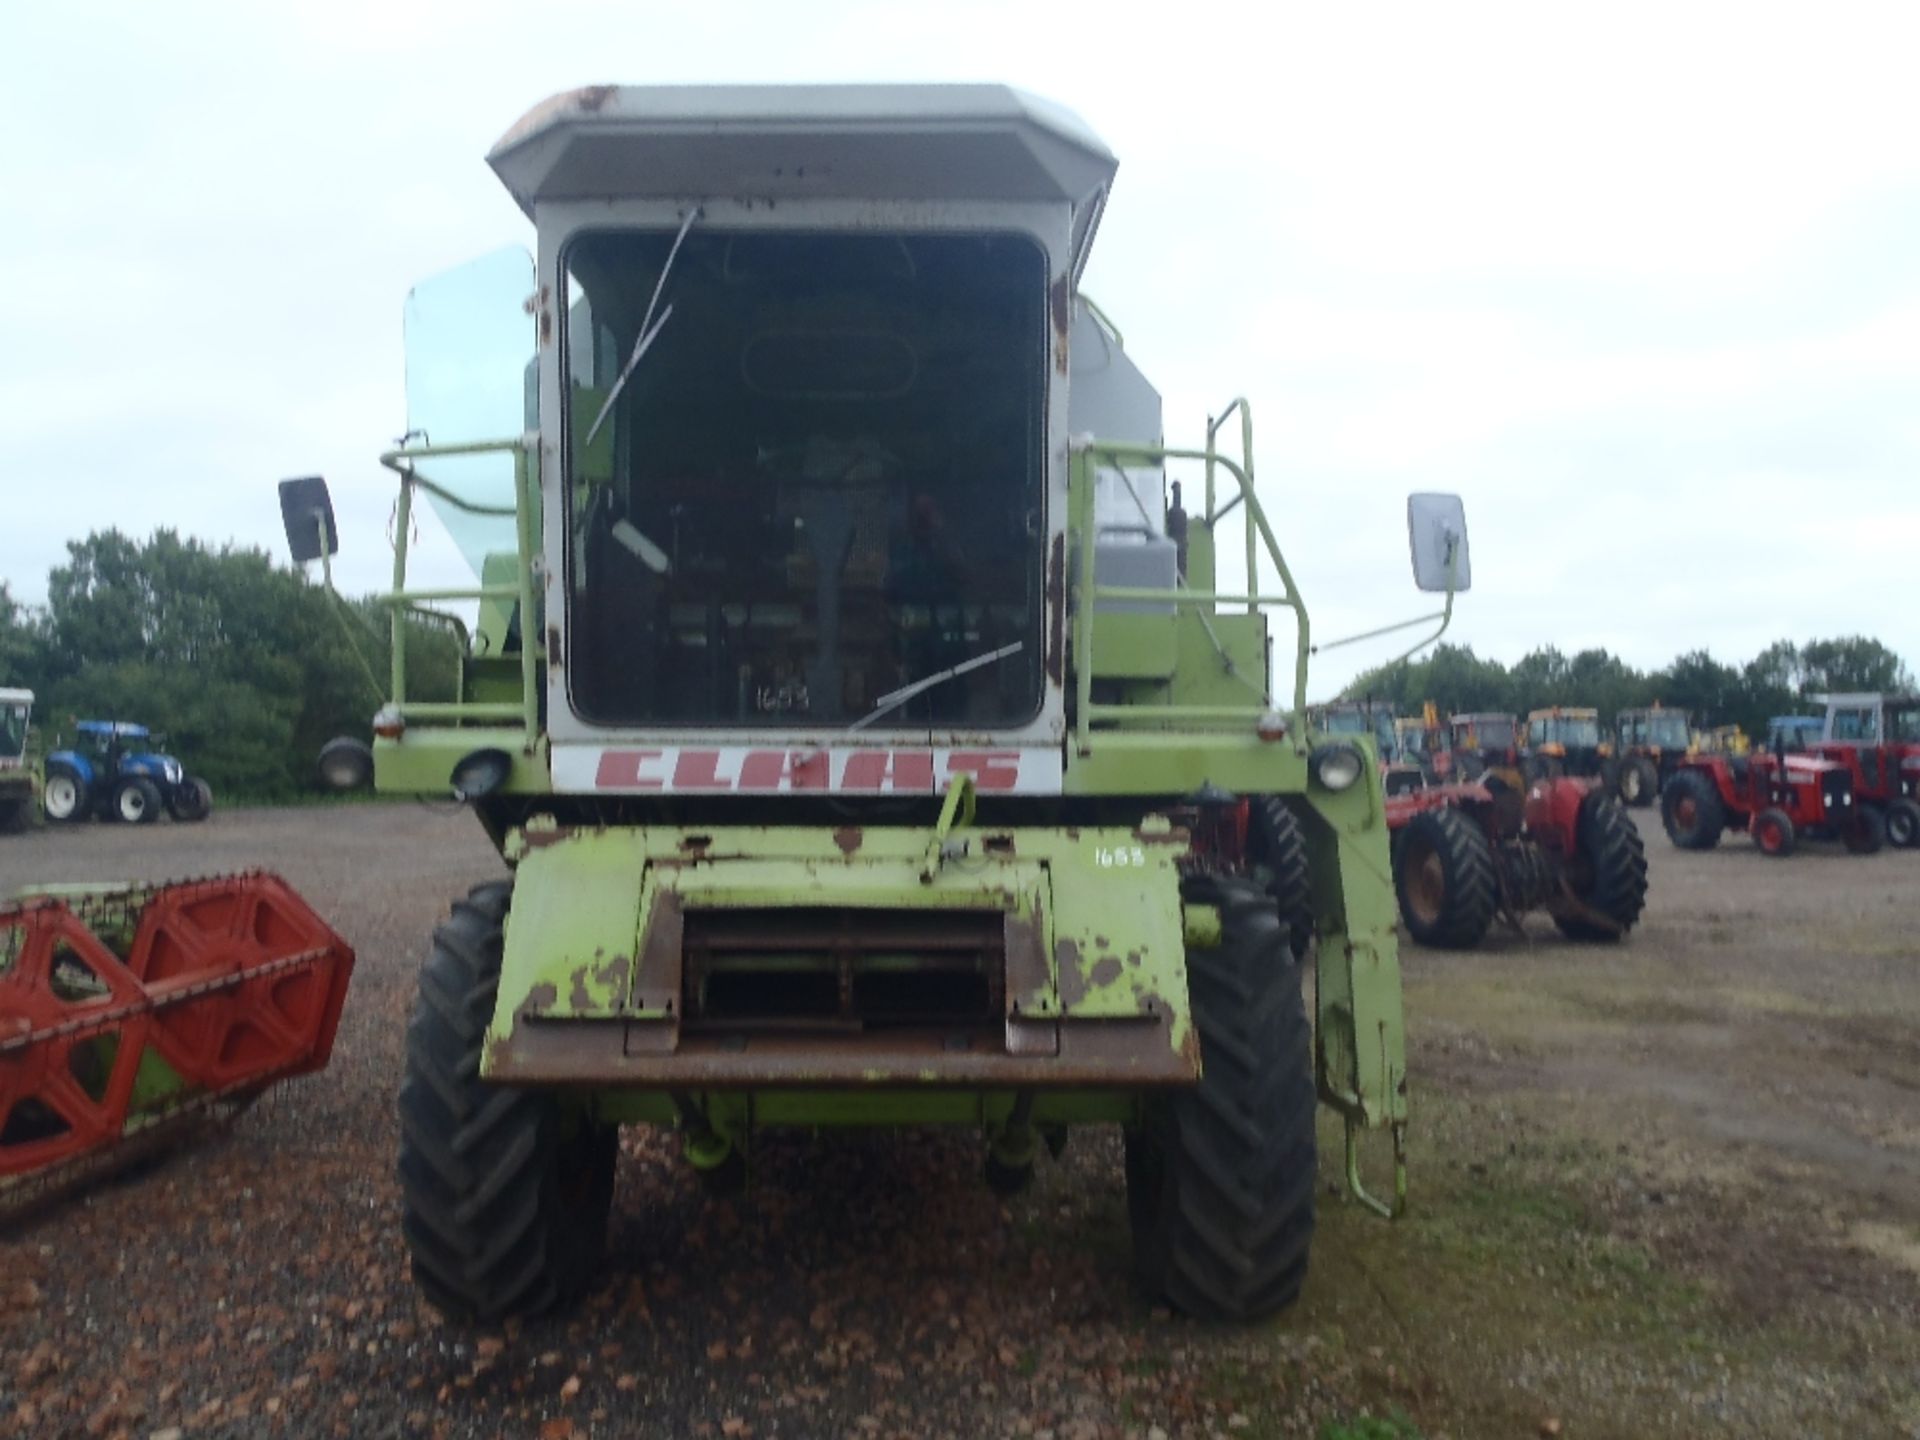 Claas 76 Combine Harvester with Perkins Engine & 12ft Header. 2644 hrs Ser No 84000345 - Image 2 of 8